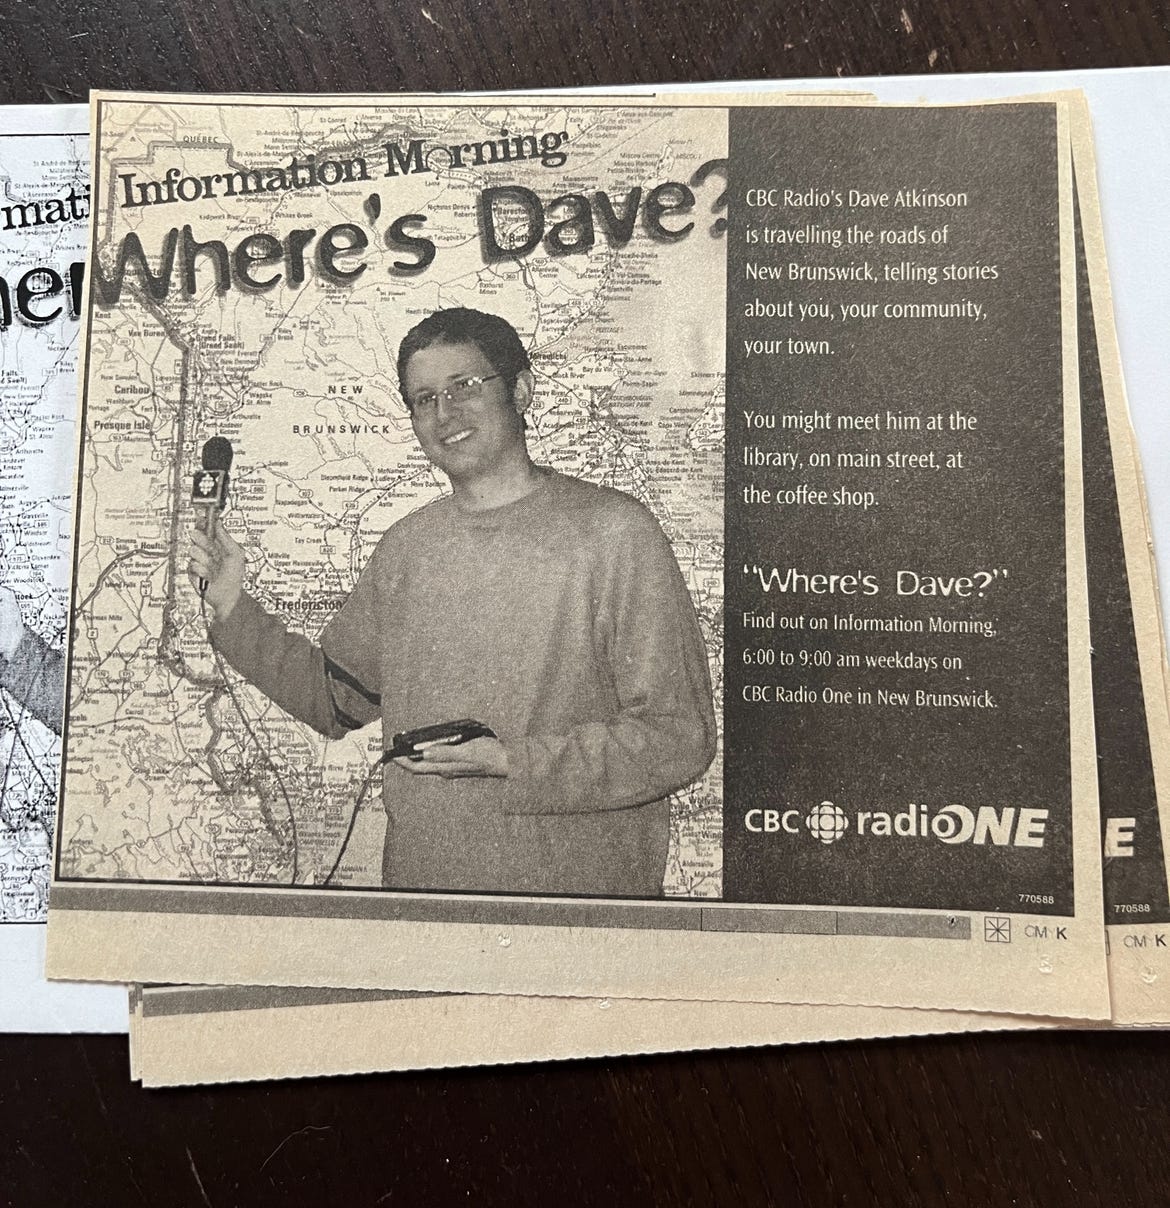 An old newspaper ad. There's a photo of a much younger me holding a microphone standing in front of a map of New Brunswick. The headline reads: Information Morning: Where's Dave? You might meet him at the library, on main street, at the coffee shop. Where's Dave? Find out on Information Morning, 6-9 a.m. on weekdays on CBC Radio ONe in New Brunswick.